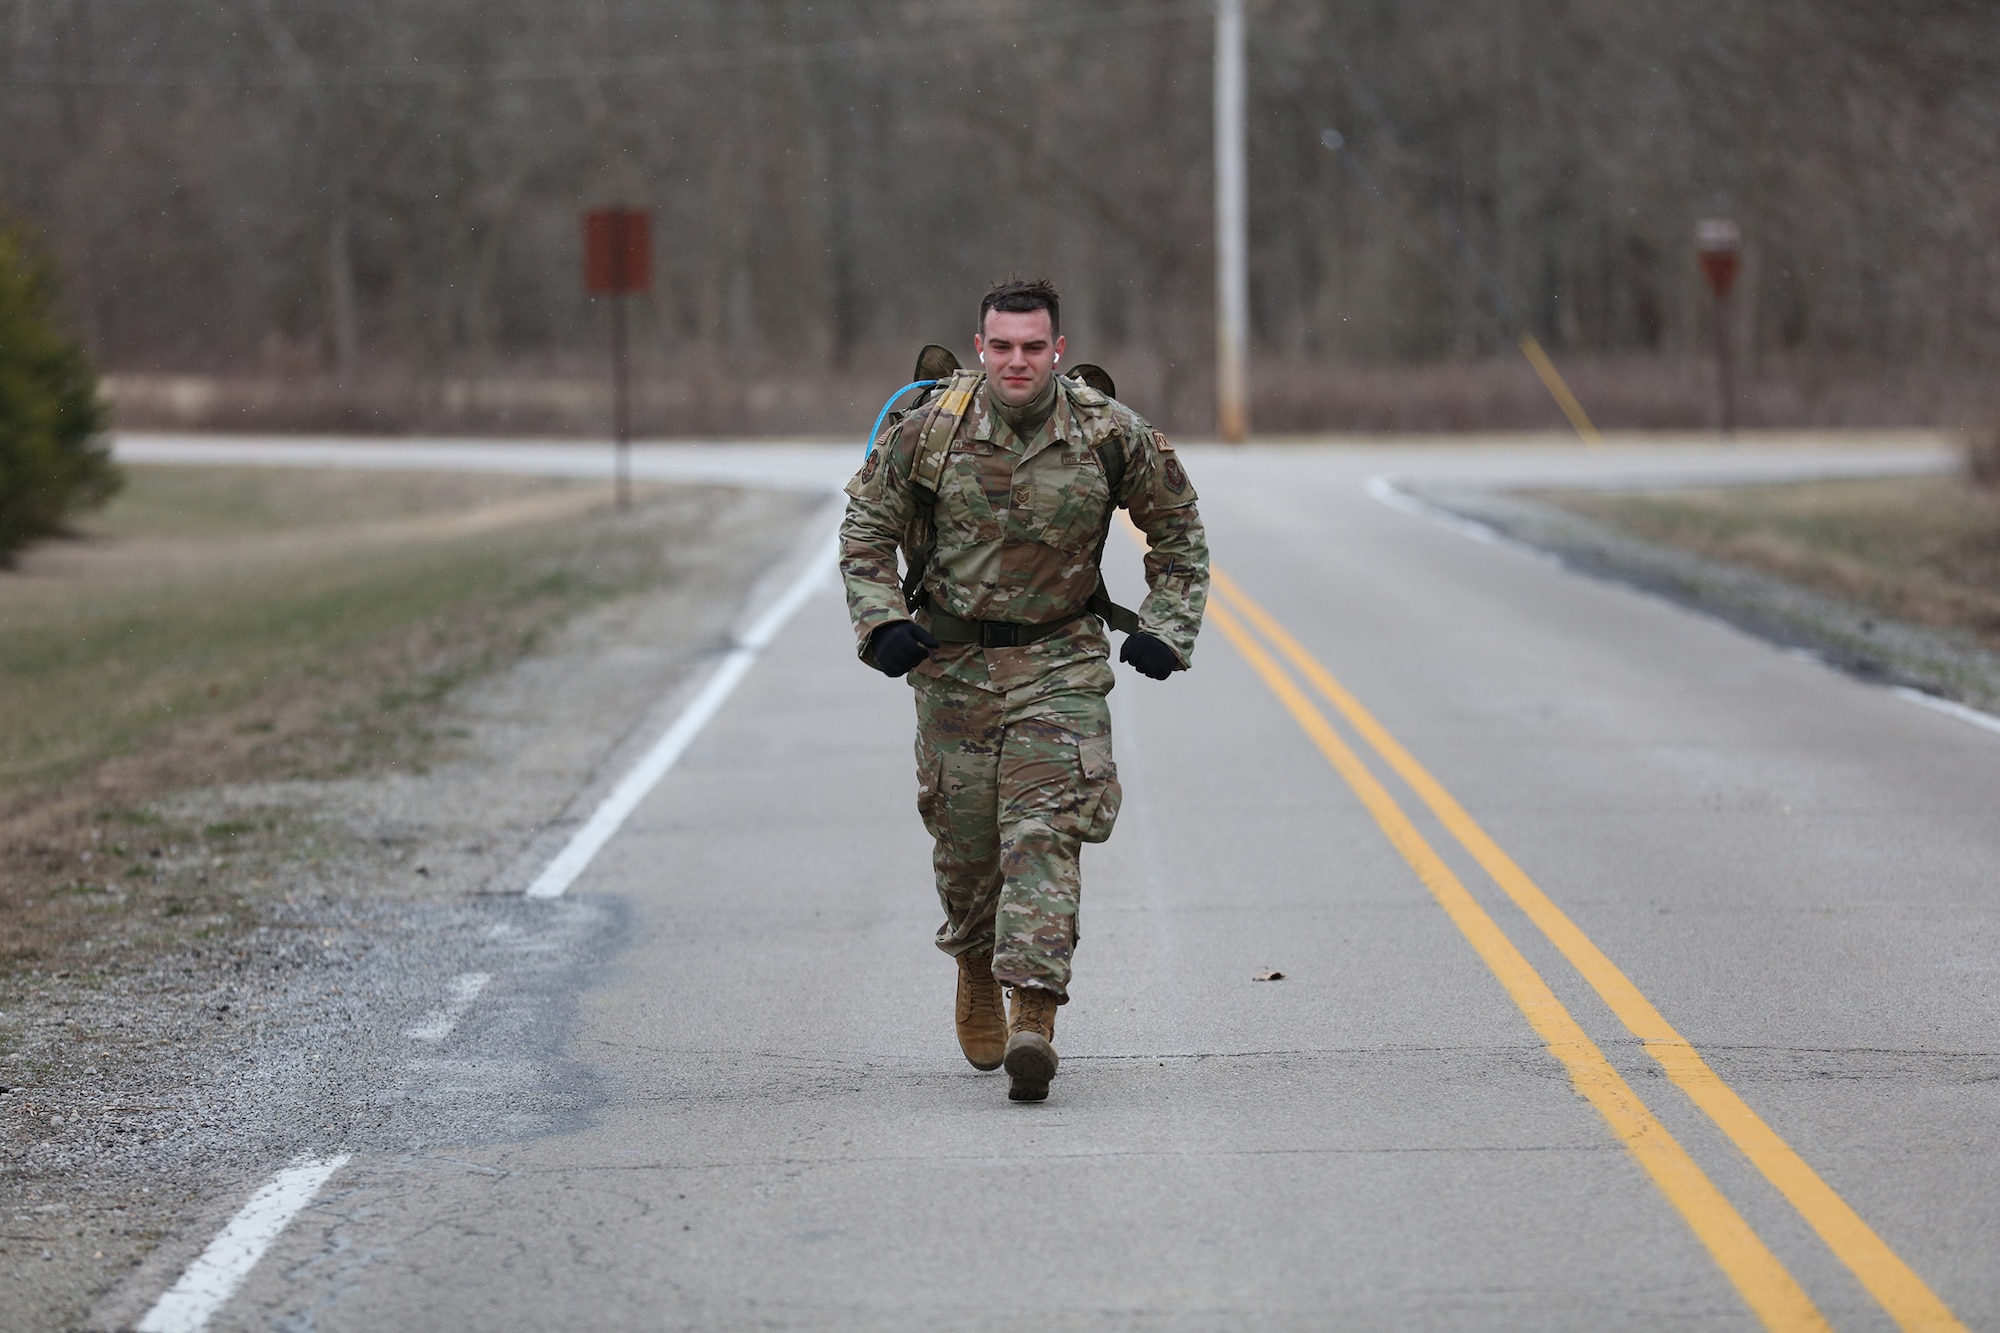 Tech. Sgt. Gabriel Clark, 87th Aerial Port Squadron ramp operations representative, pushes through a 12k ruck-march during the German Armed Forces Military Proficiency Badge qualification at Wright-Patterson Air Force Base, Ohio, Feb. 3, 2023.